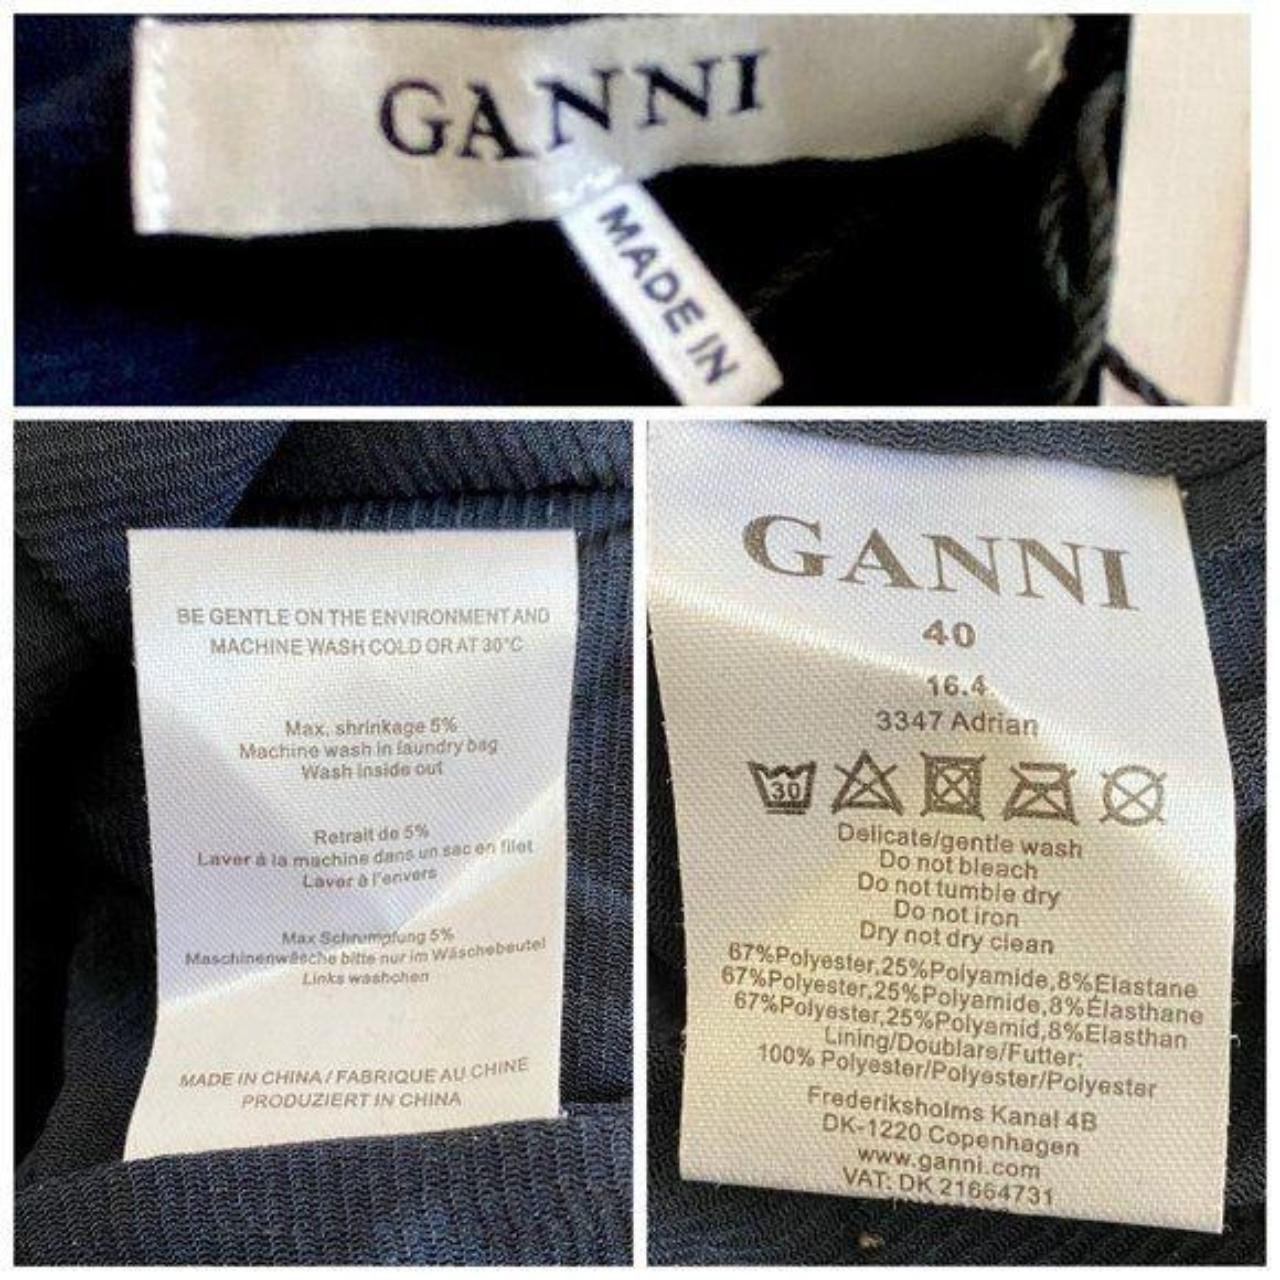 Product Image 3 - Brand new with tags
Ganni Adruan